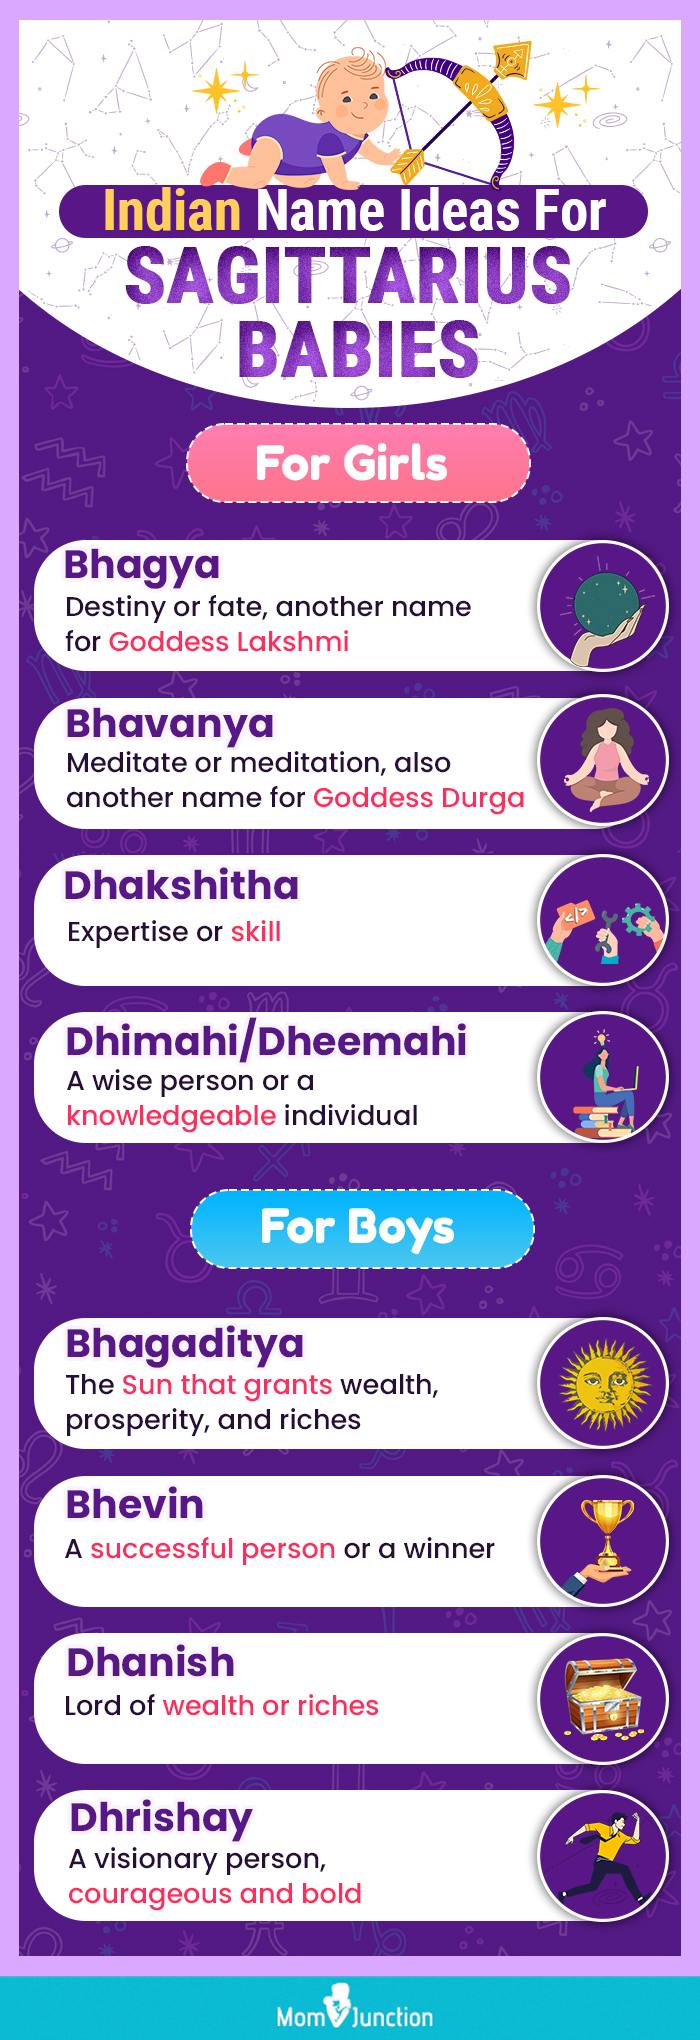 sagittarius baby names for boys and girls [infographic]